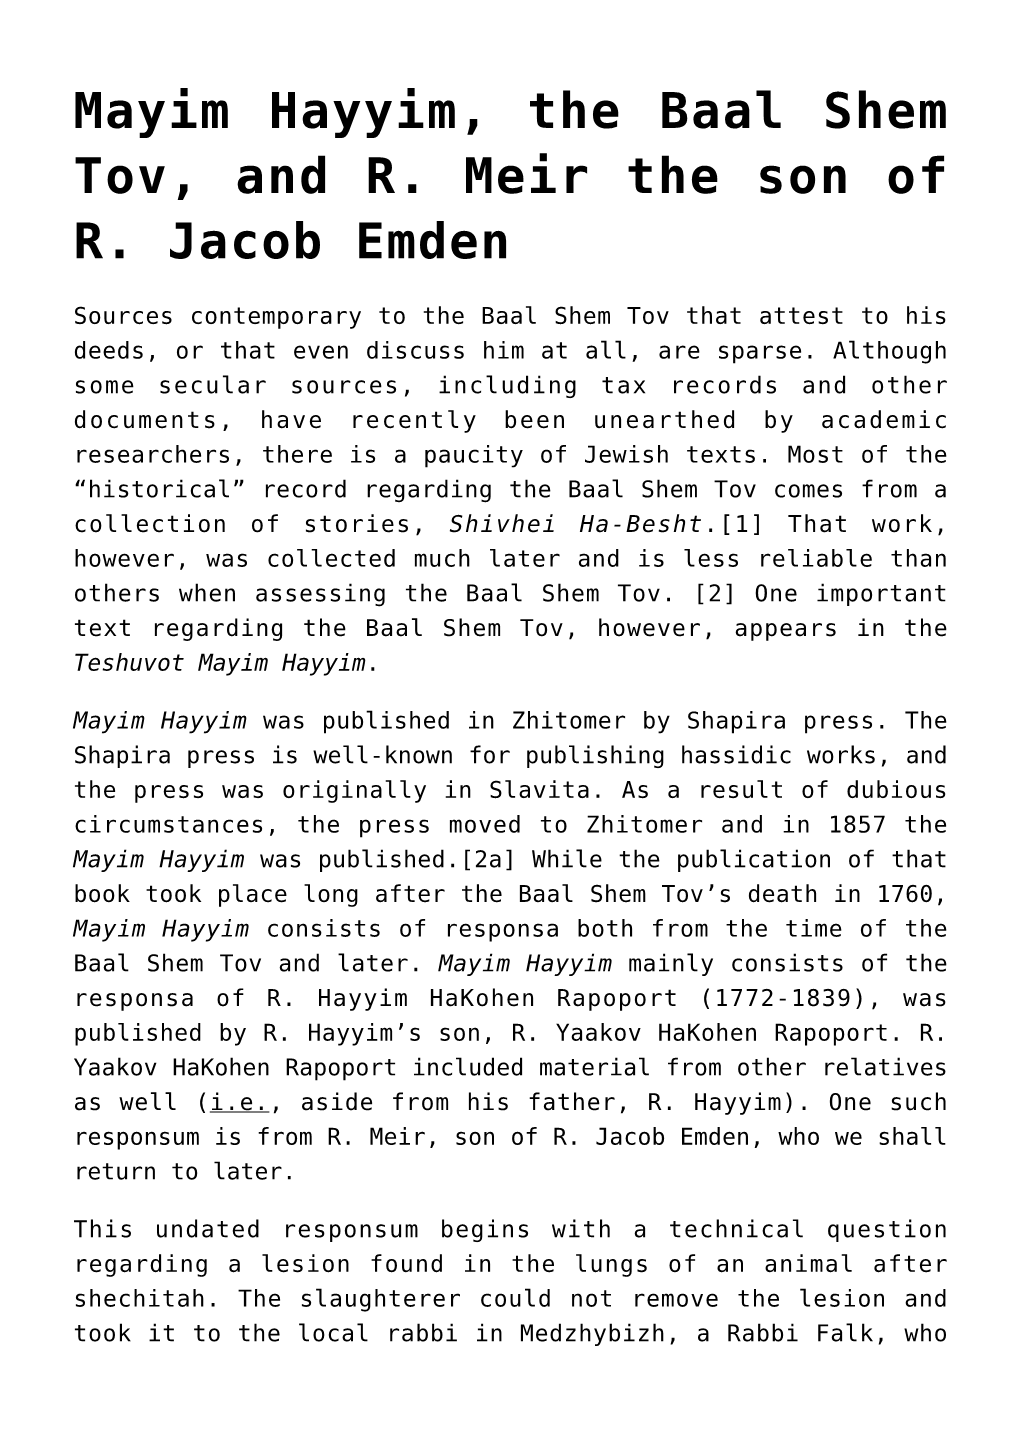 Mayim Hayyim, the Baal Shem Tov, and R. Meir the Son of R. Jacob Emden